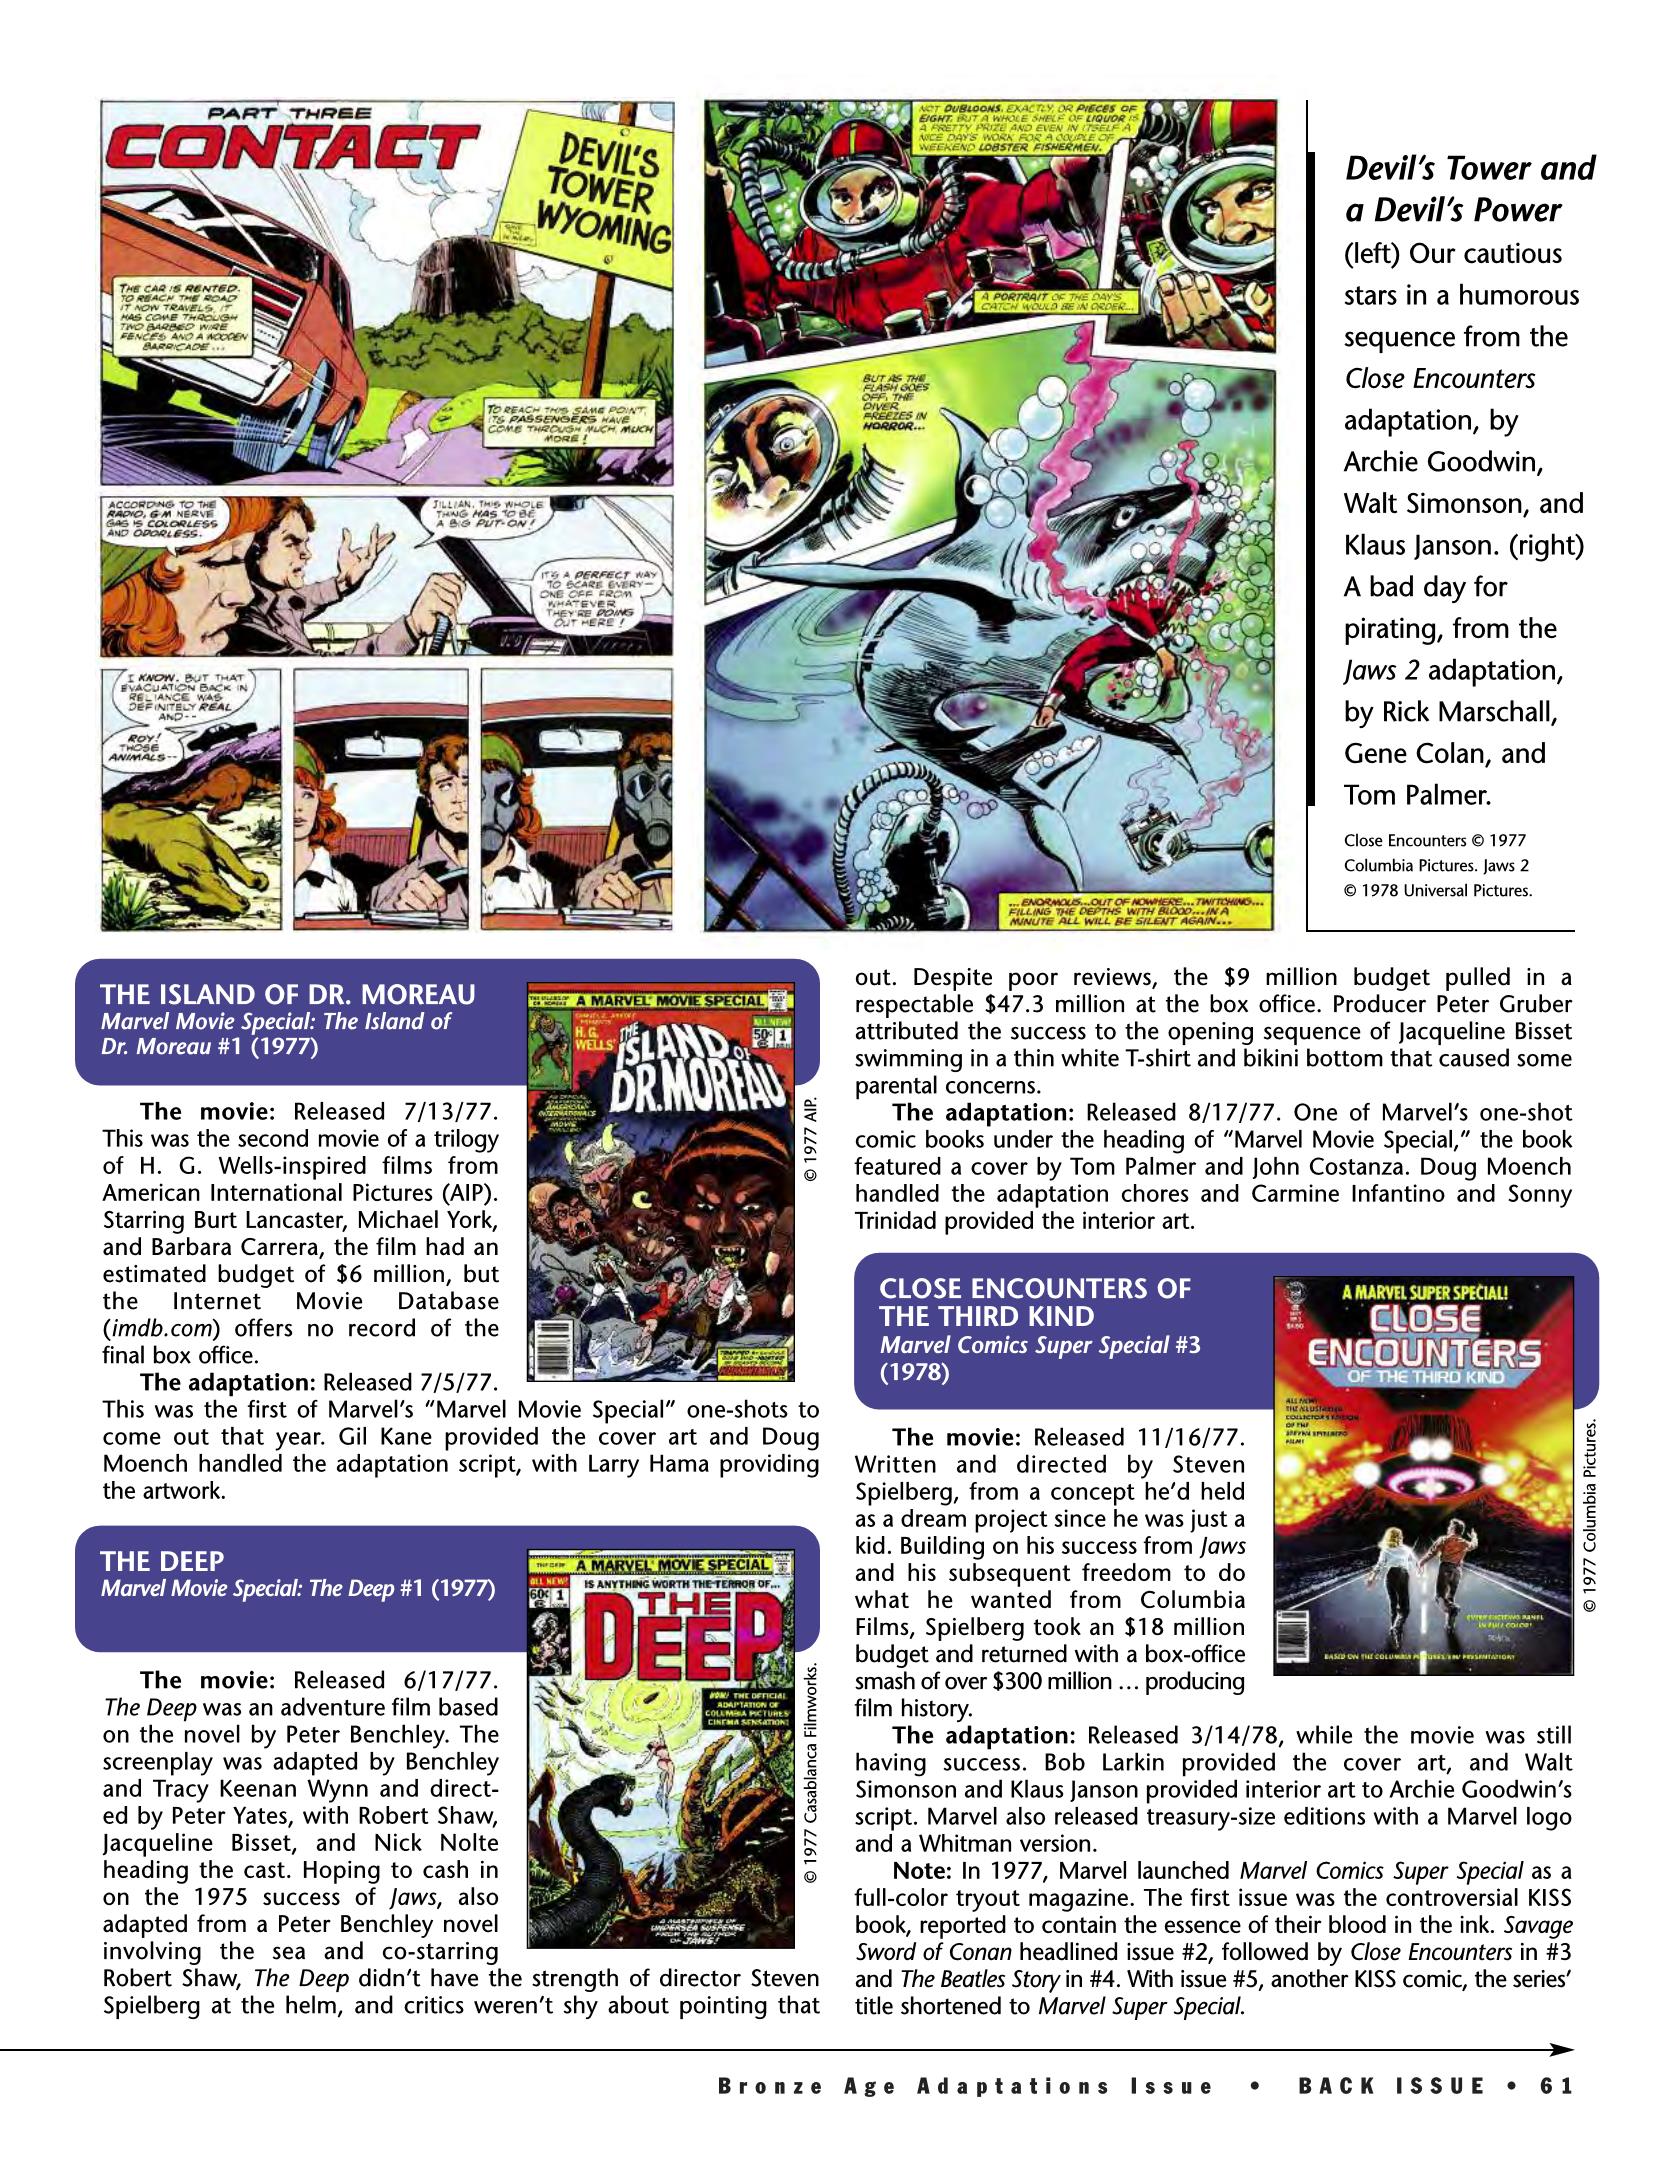 Read online Back Issue comic -  Issue #89 - 60